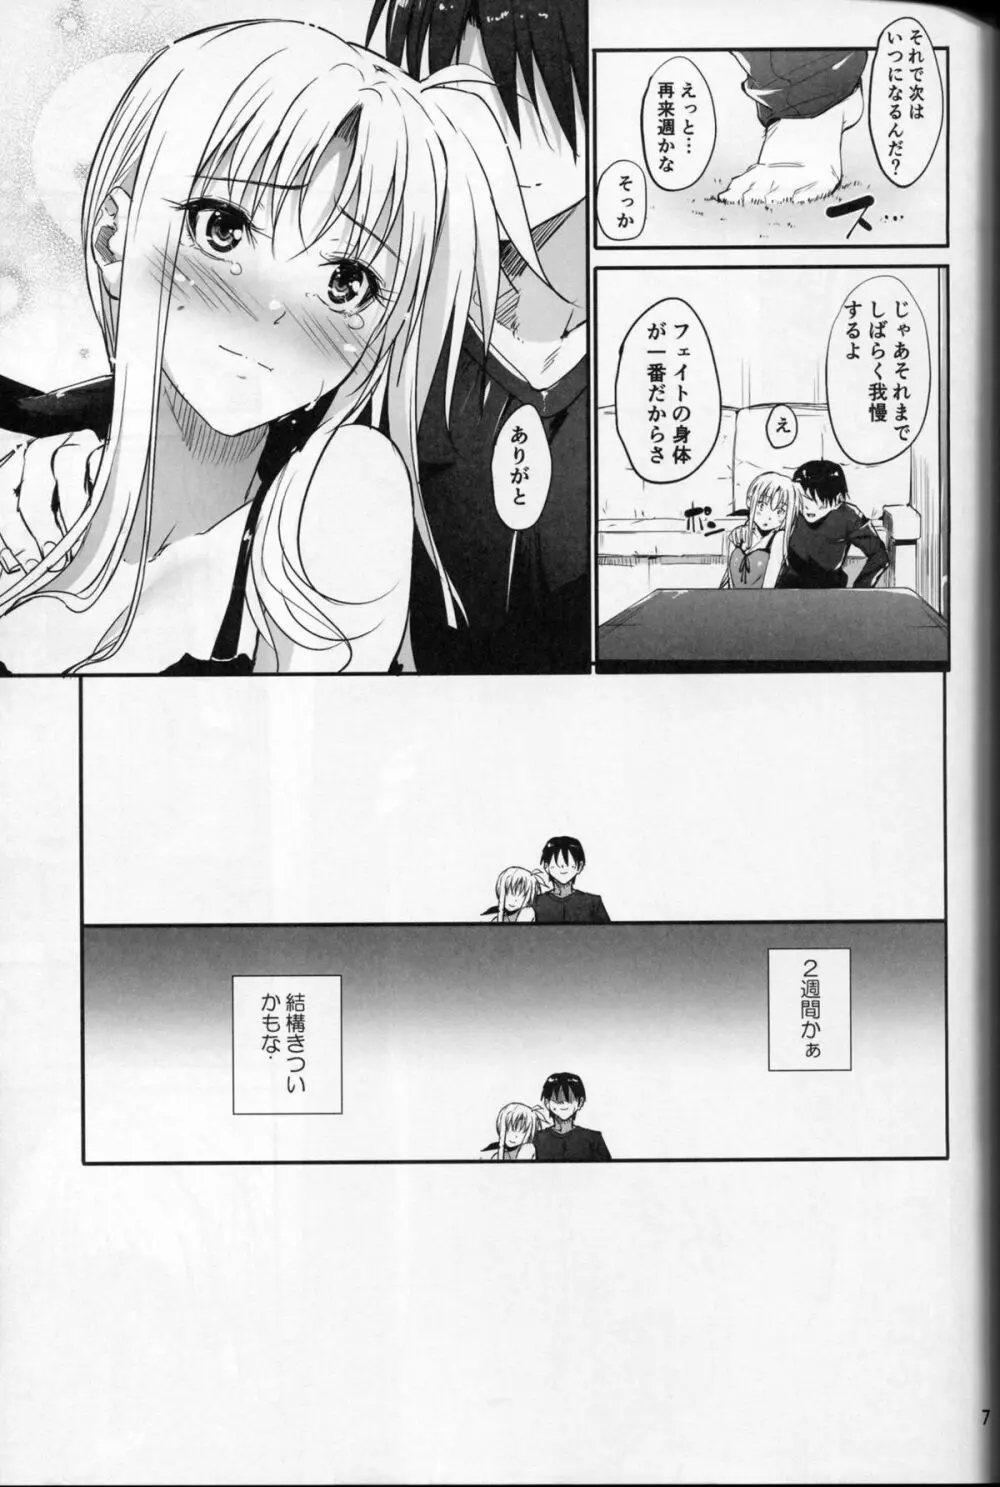 Home Sweet Home ～フェイト編 6～ - page6